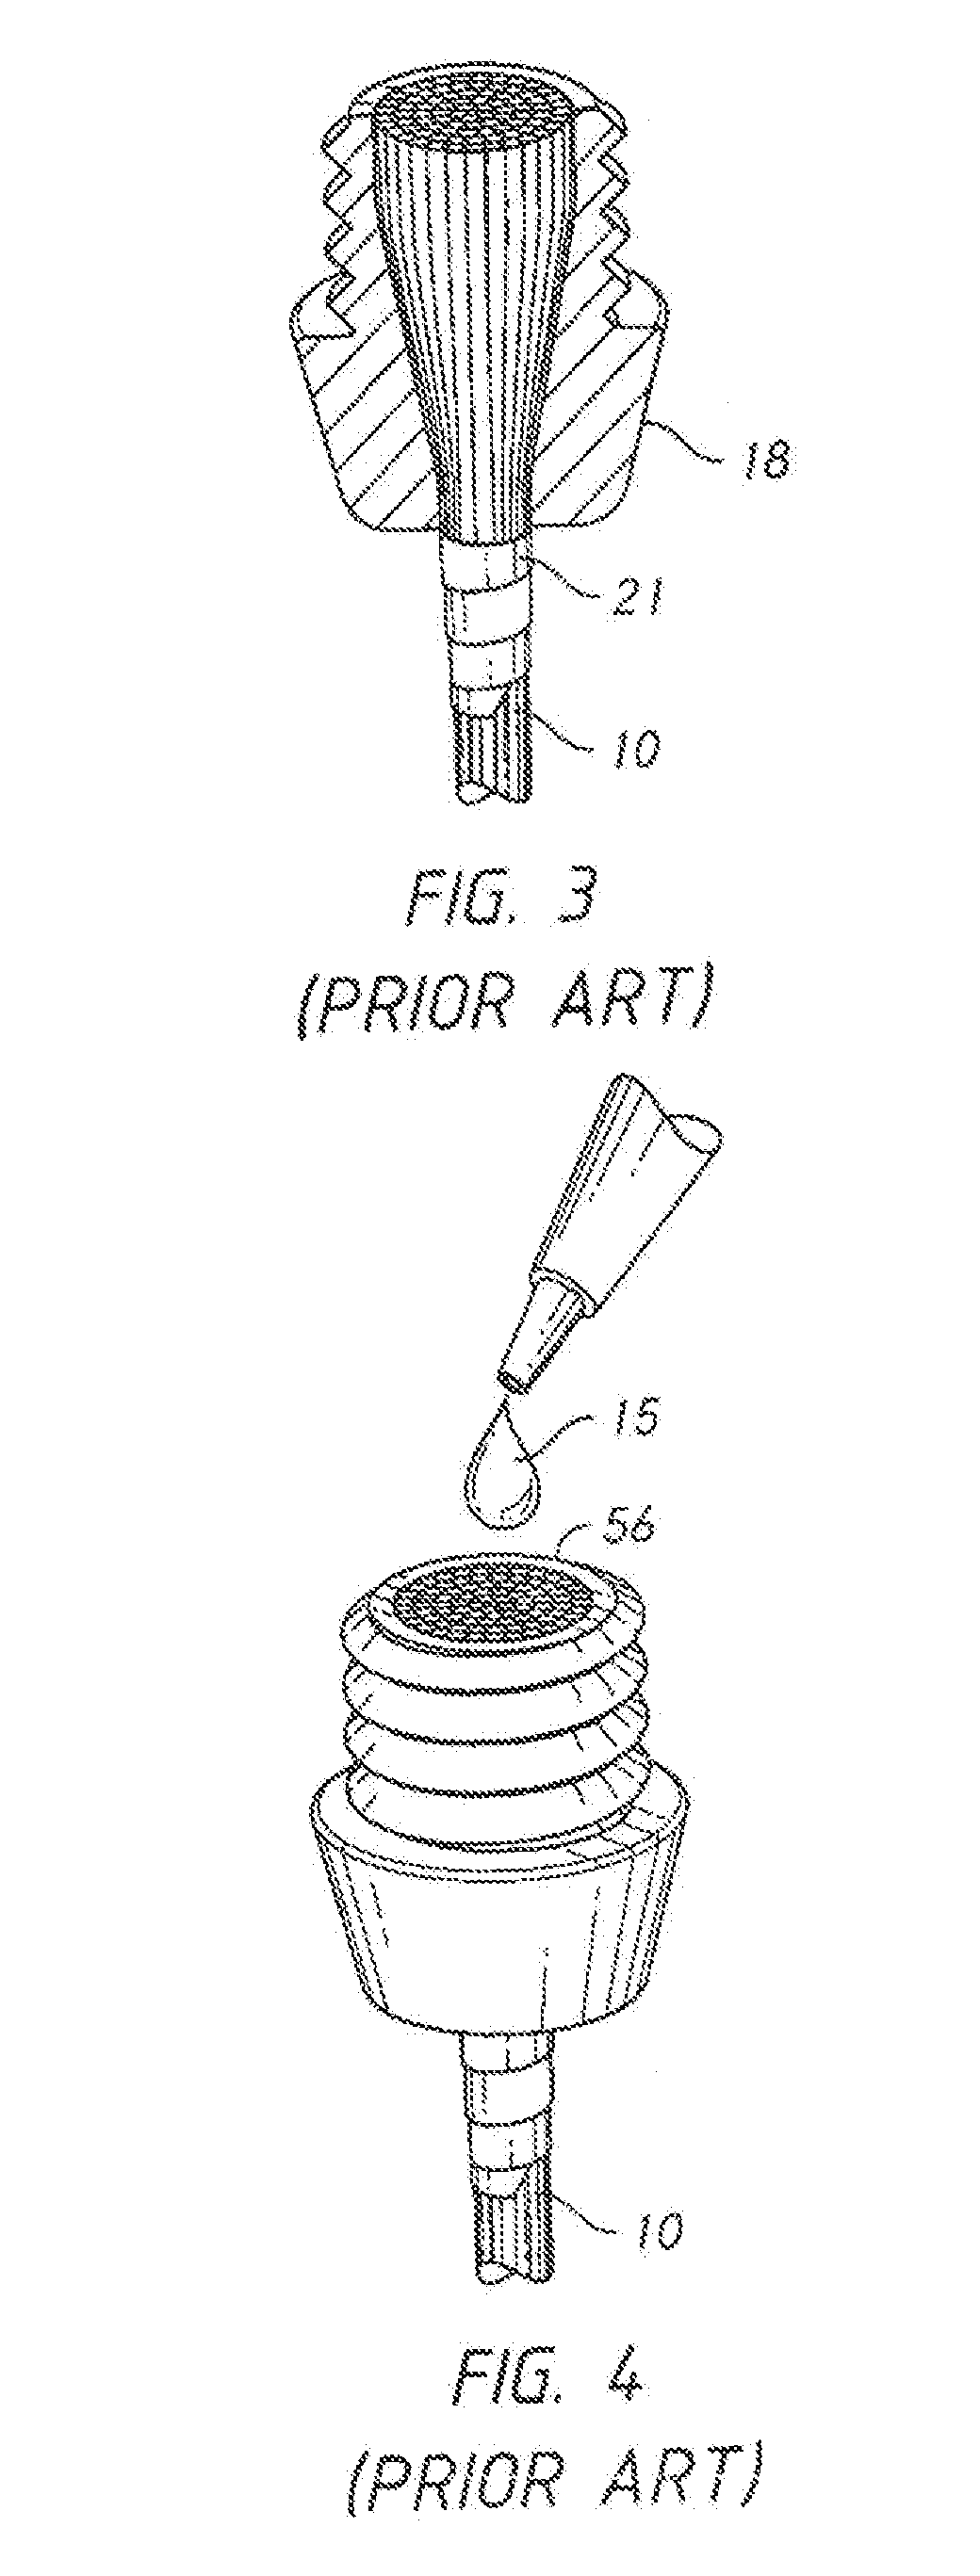 Inverted Injection Method of Affixing a Termination to a Tensile Member